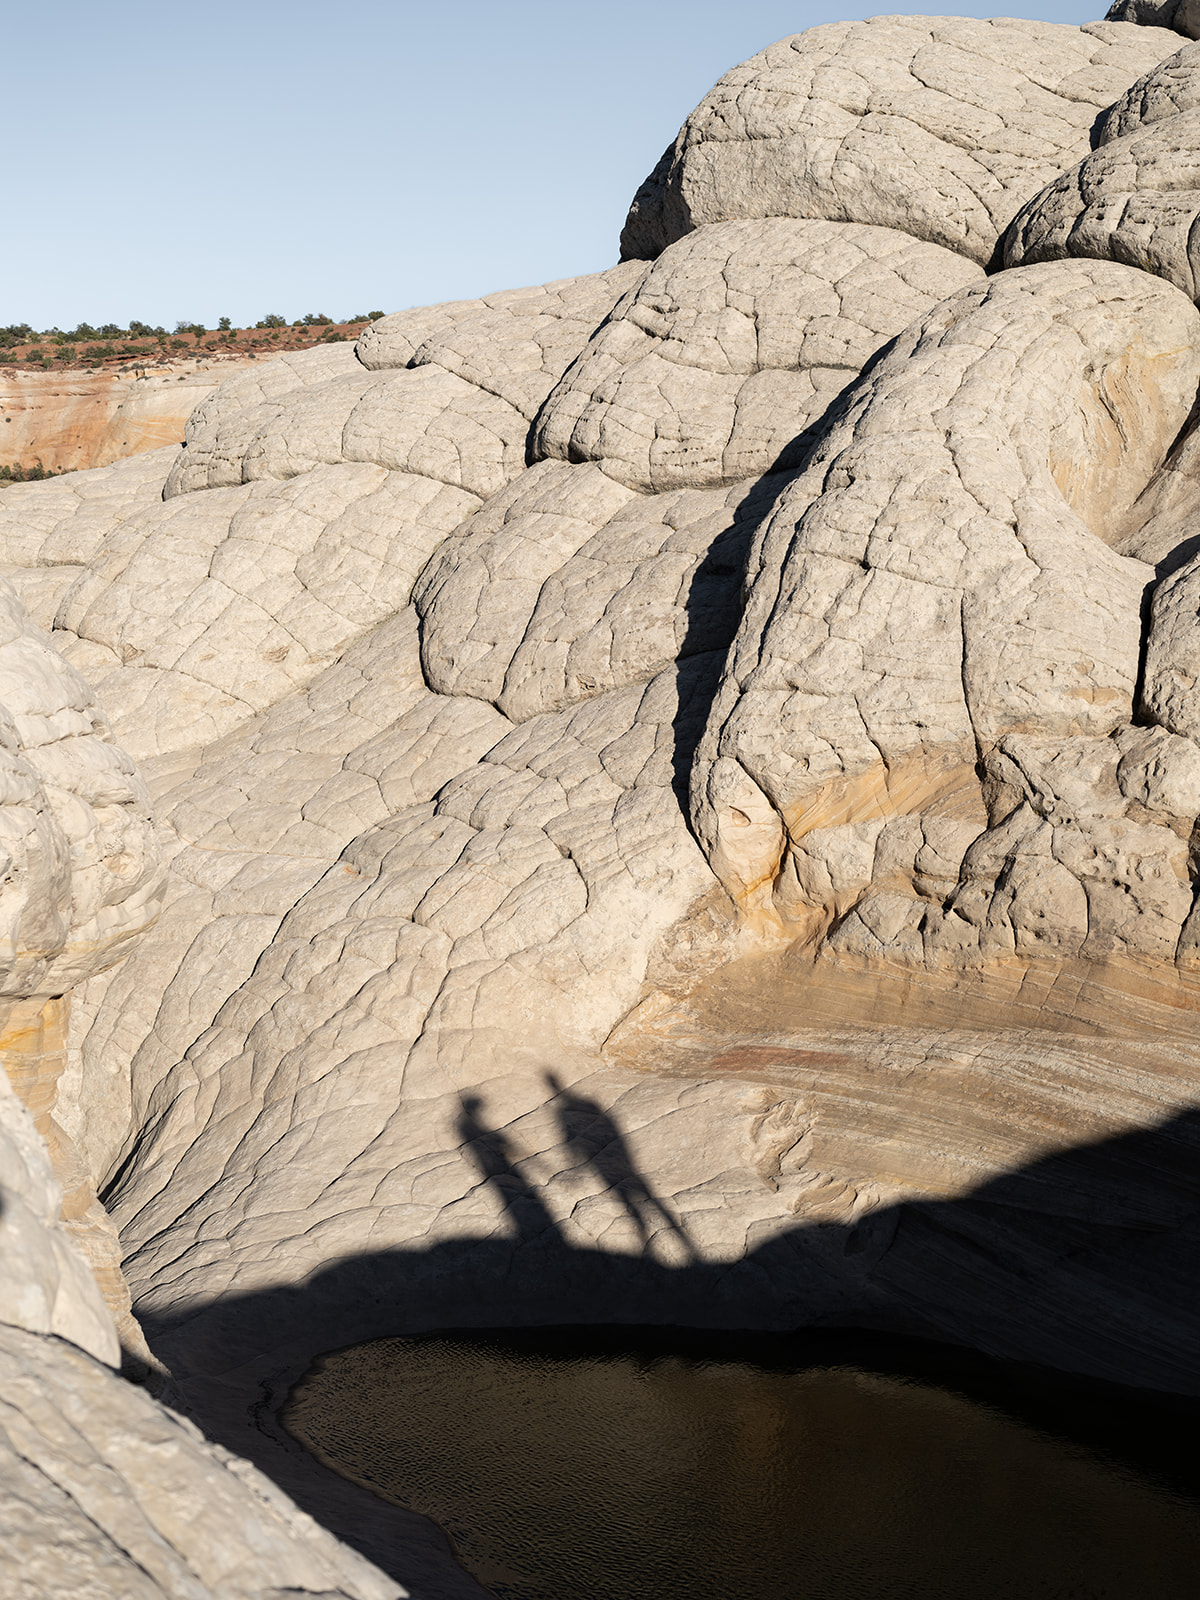 Shadows of the bride and groom cast on sandstone at White pocket Arizona during their Elopement